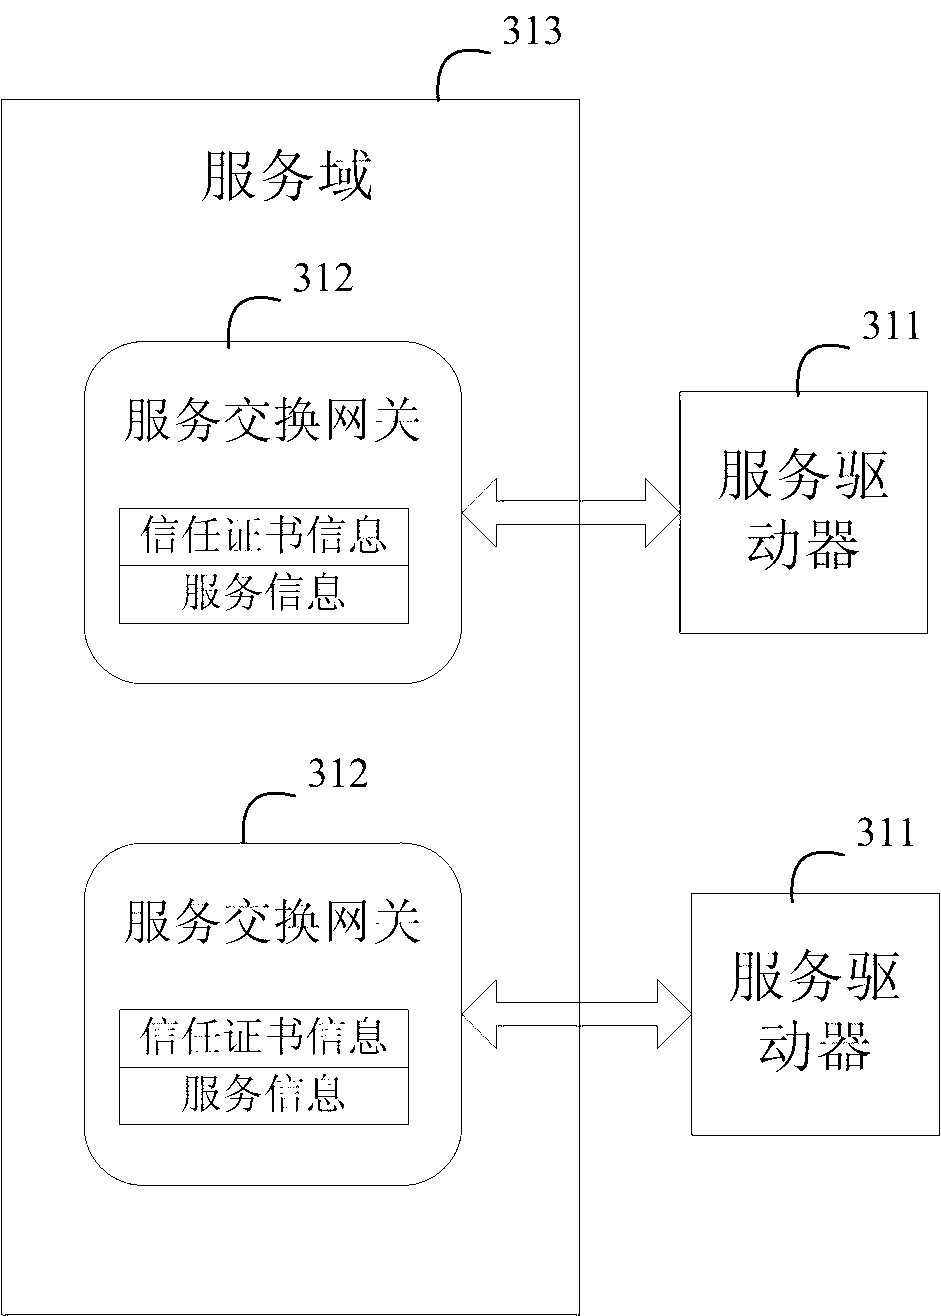 Cloud service switching system and service inquiring and switching method